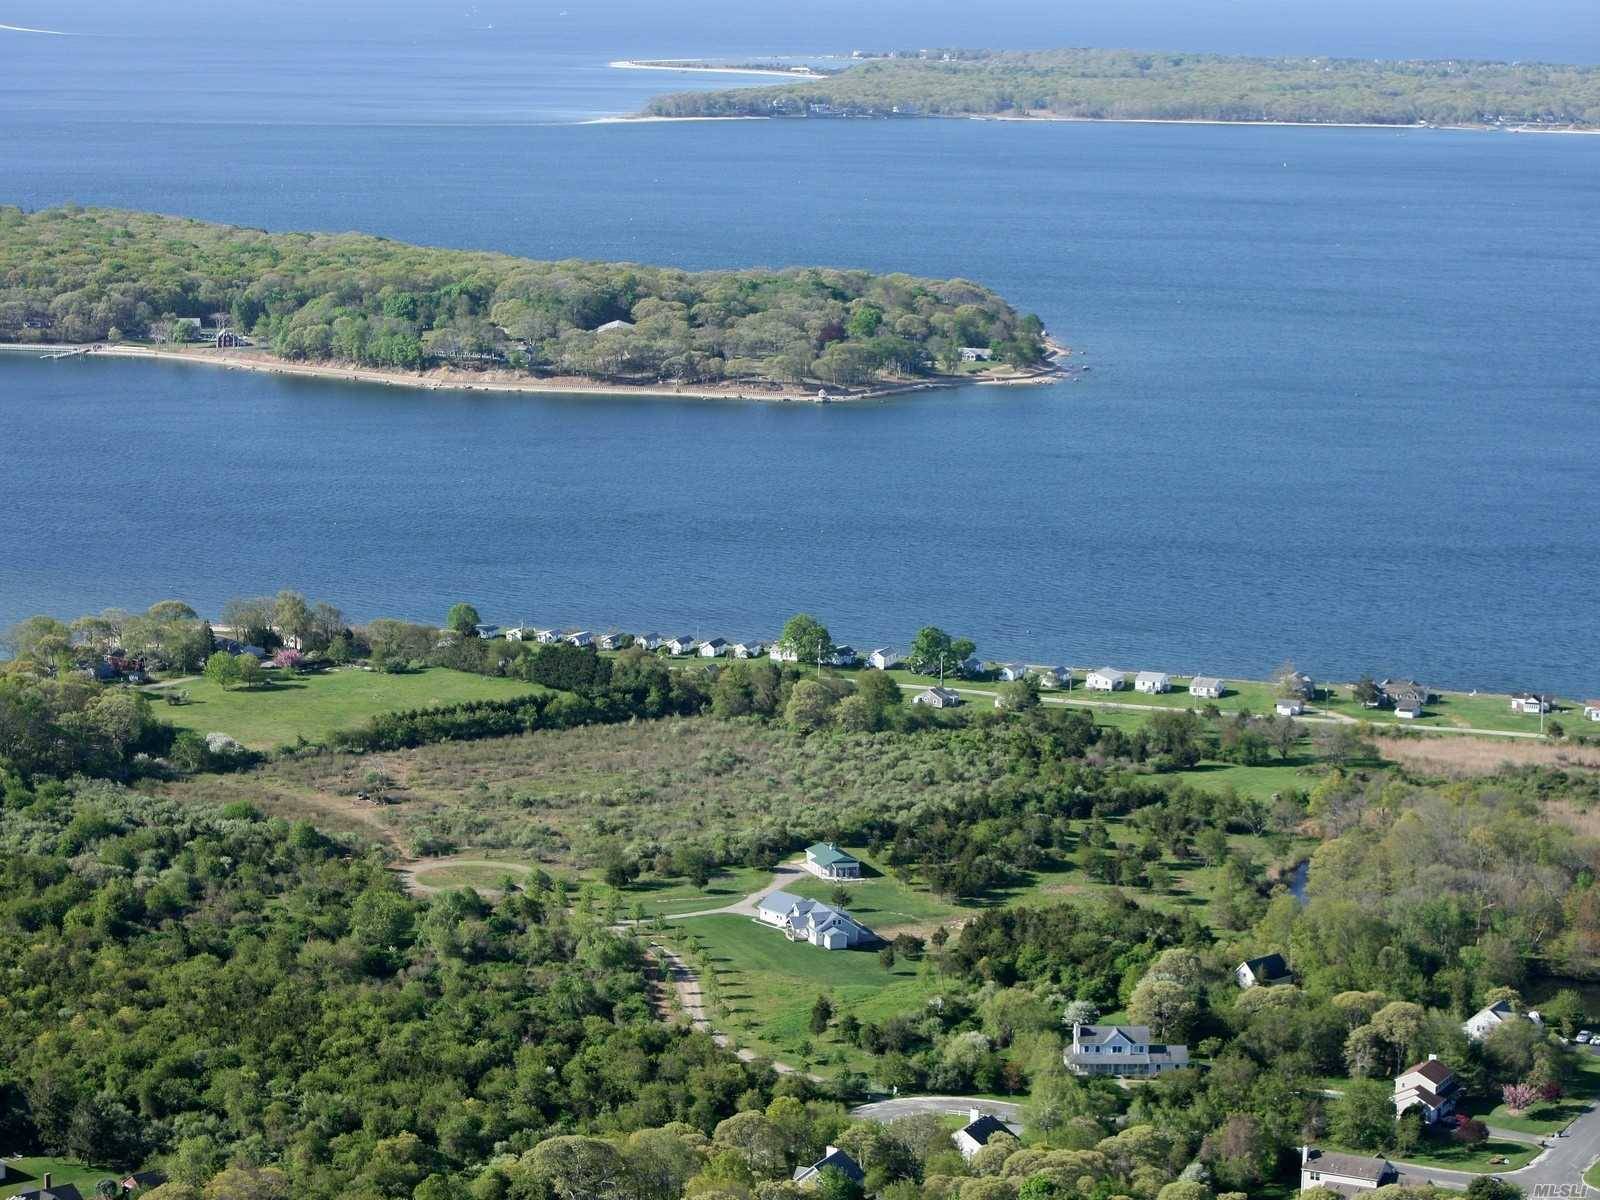 7. 56 Acre Lot. Build Your Own Home In This Serene Paradise Isle Section Of Greenport.